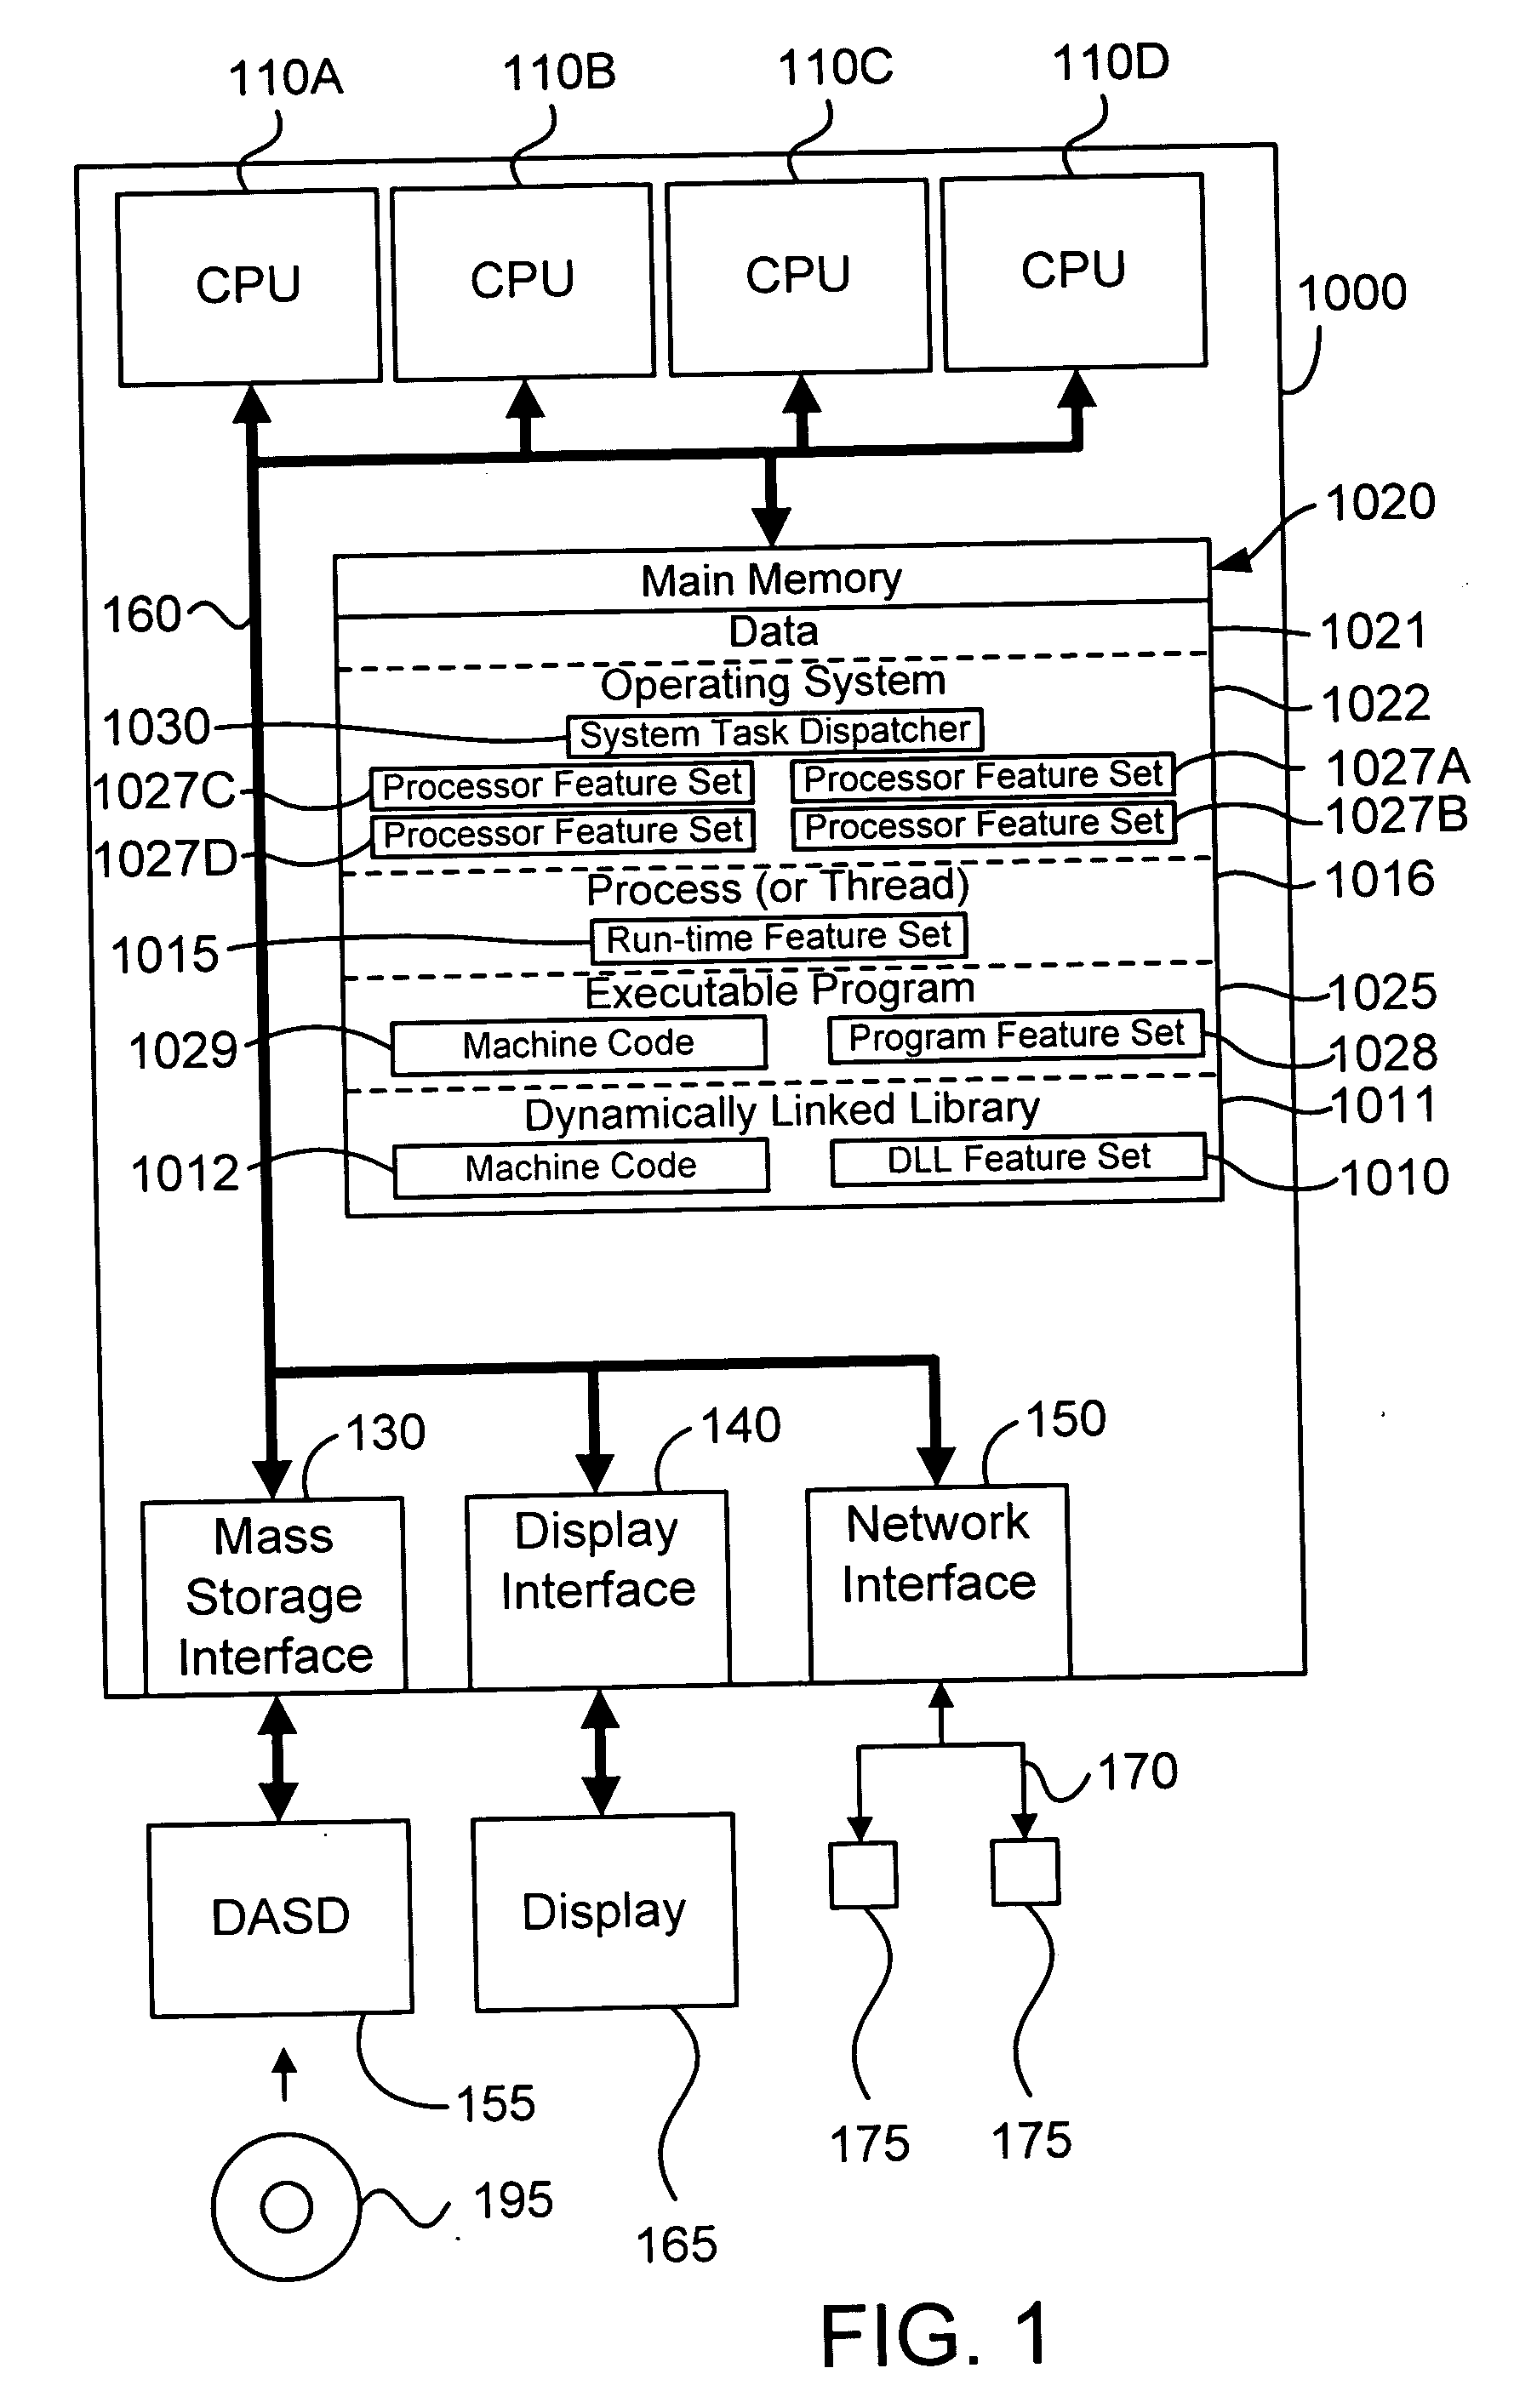 Method, apparatus, and computer program product for adaptive process dispatch in a computer system having a plurality of processors